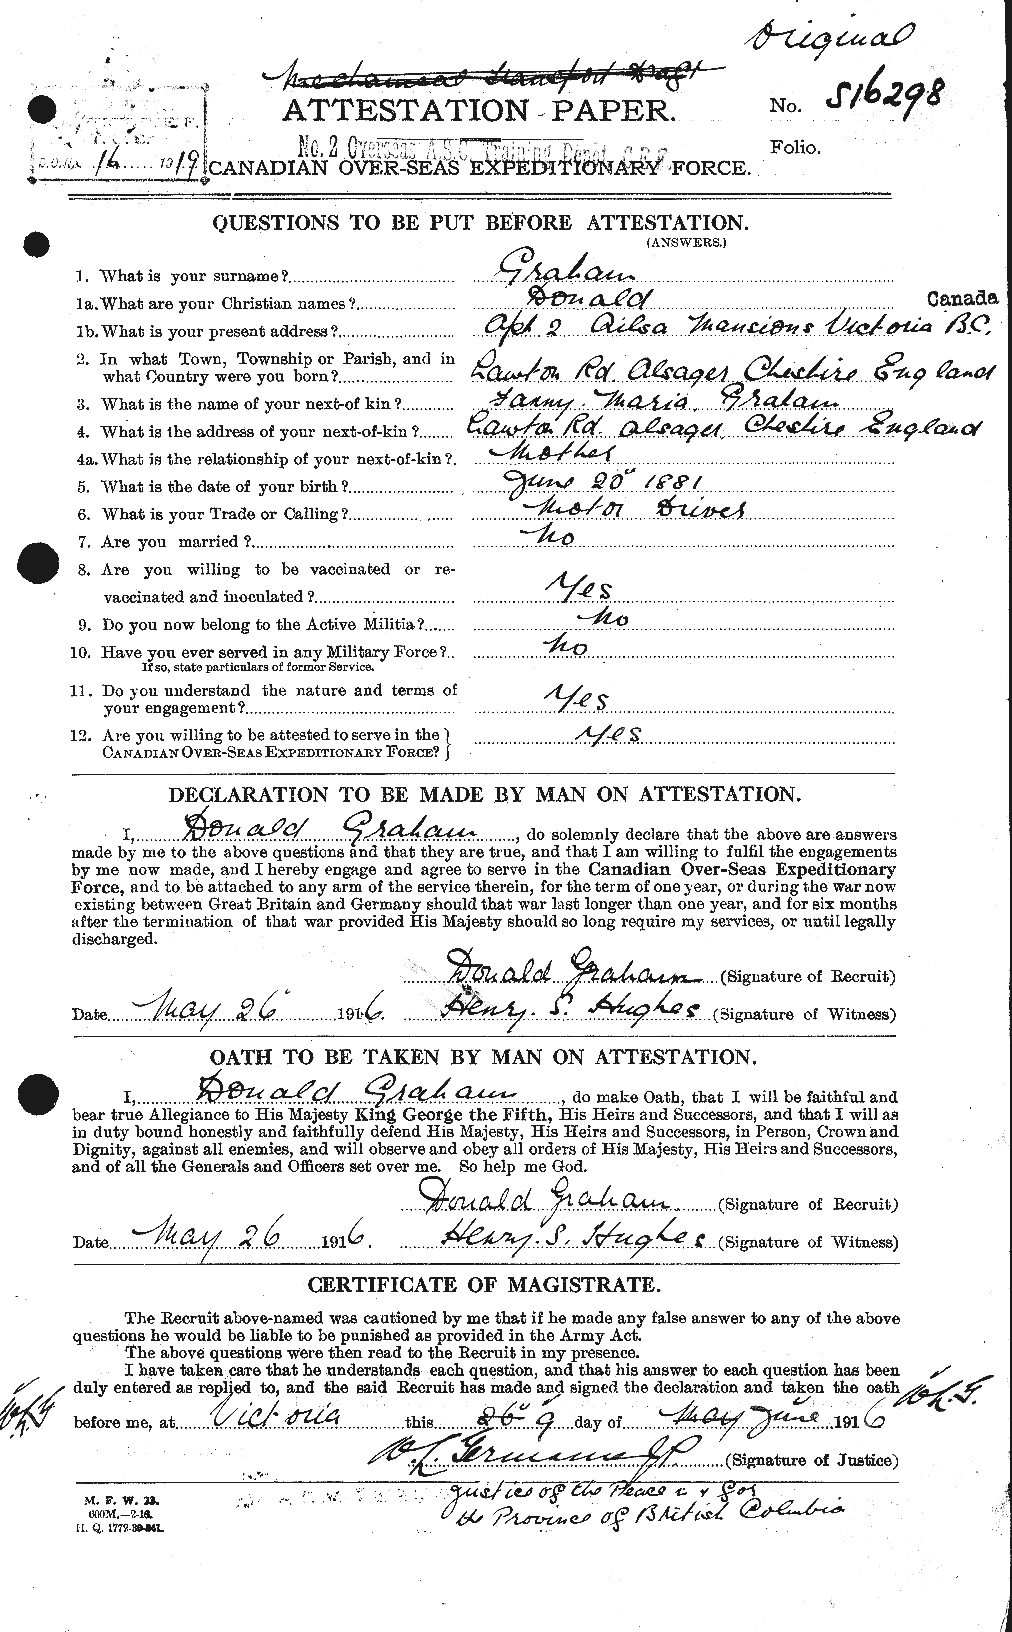 Personnel Records of the First World War - CEF 353837a